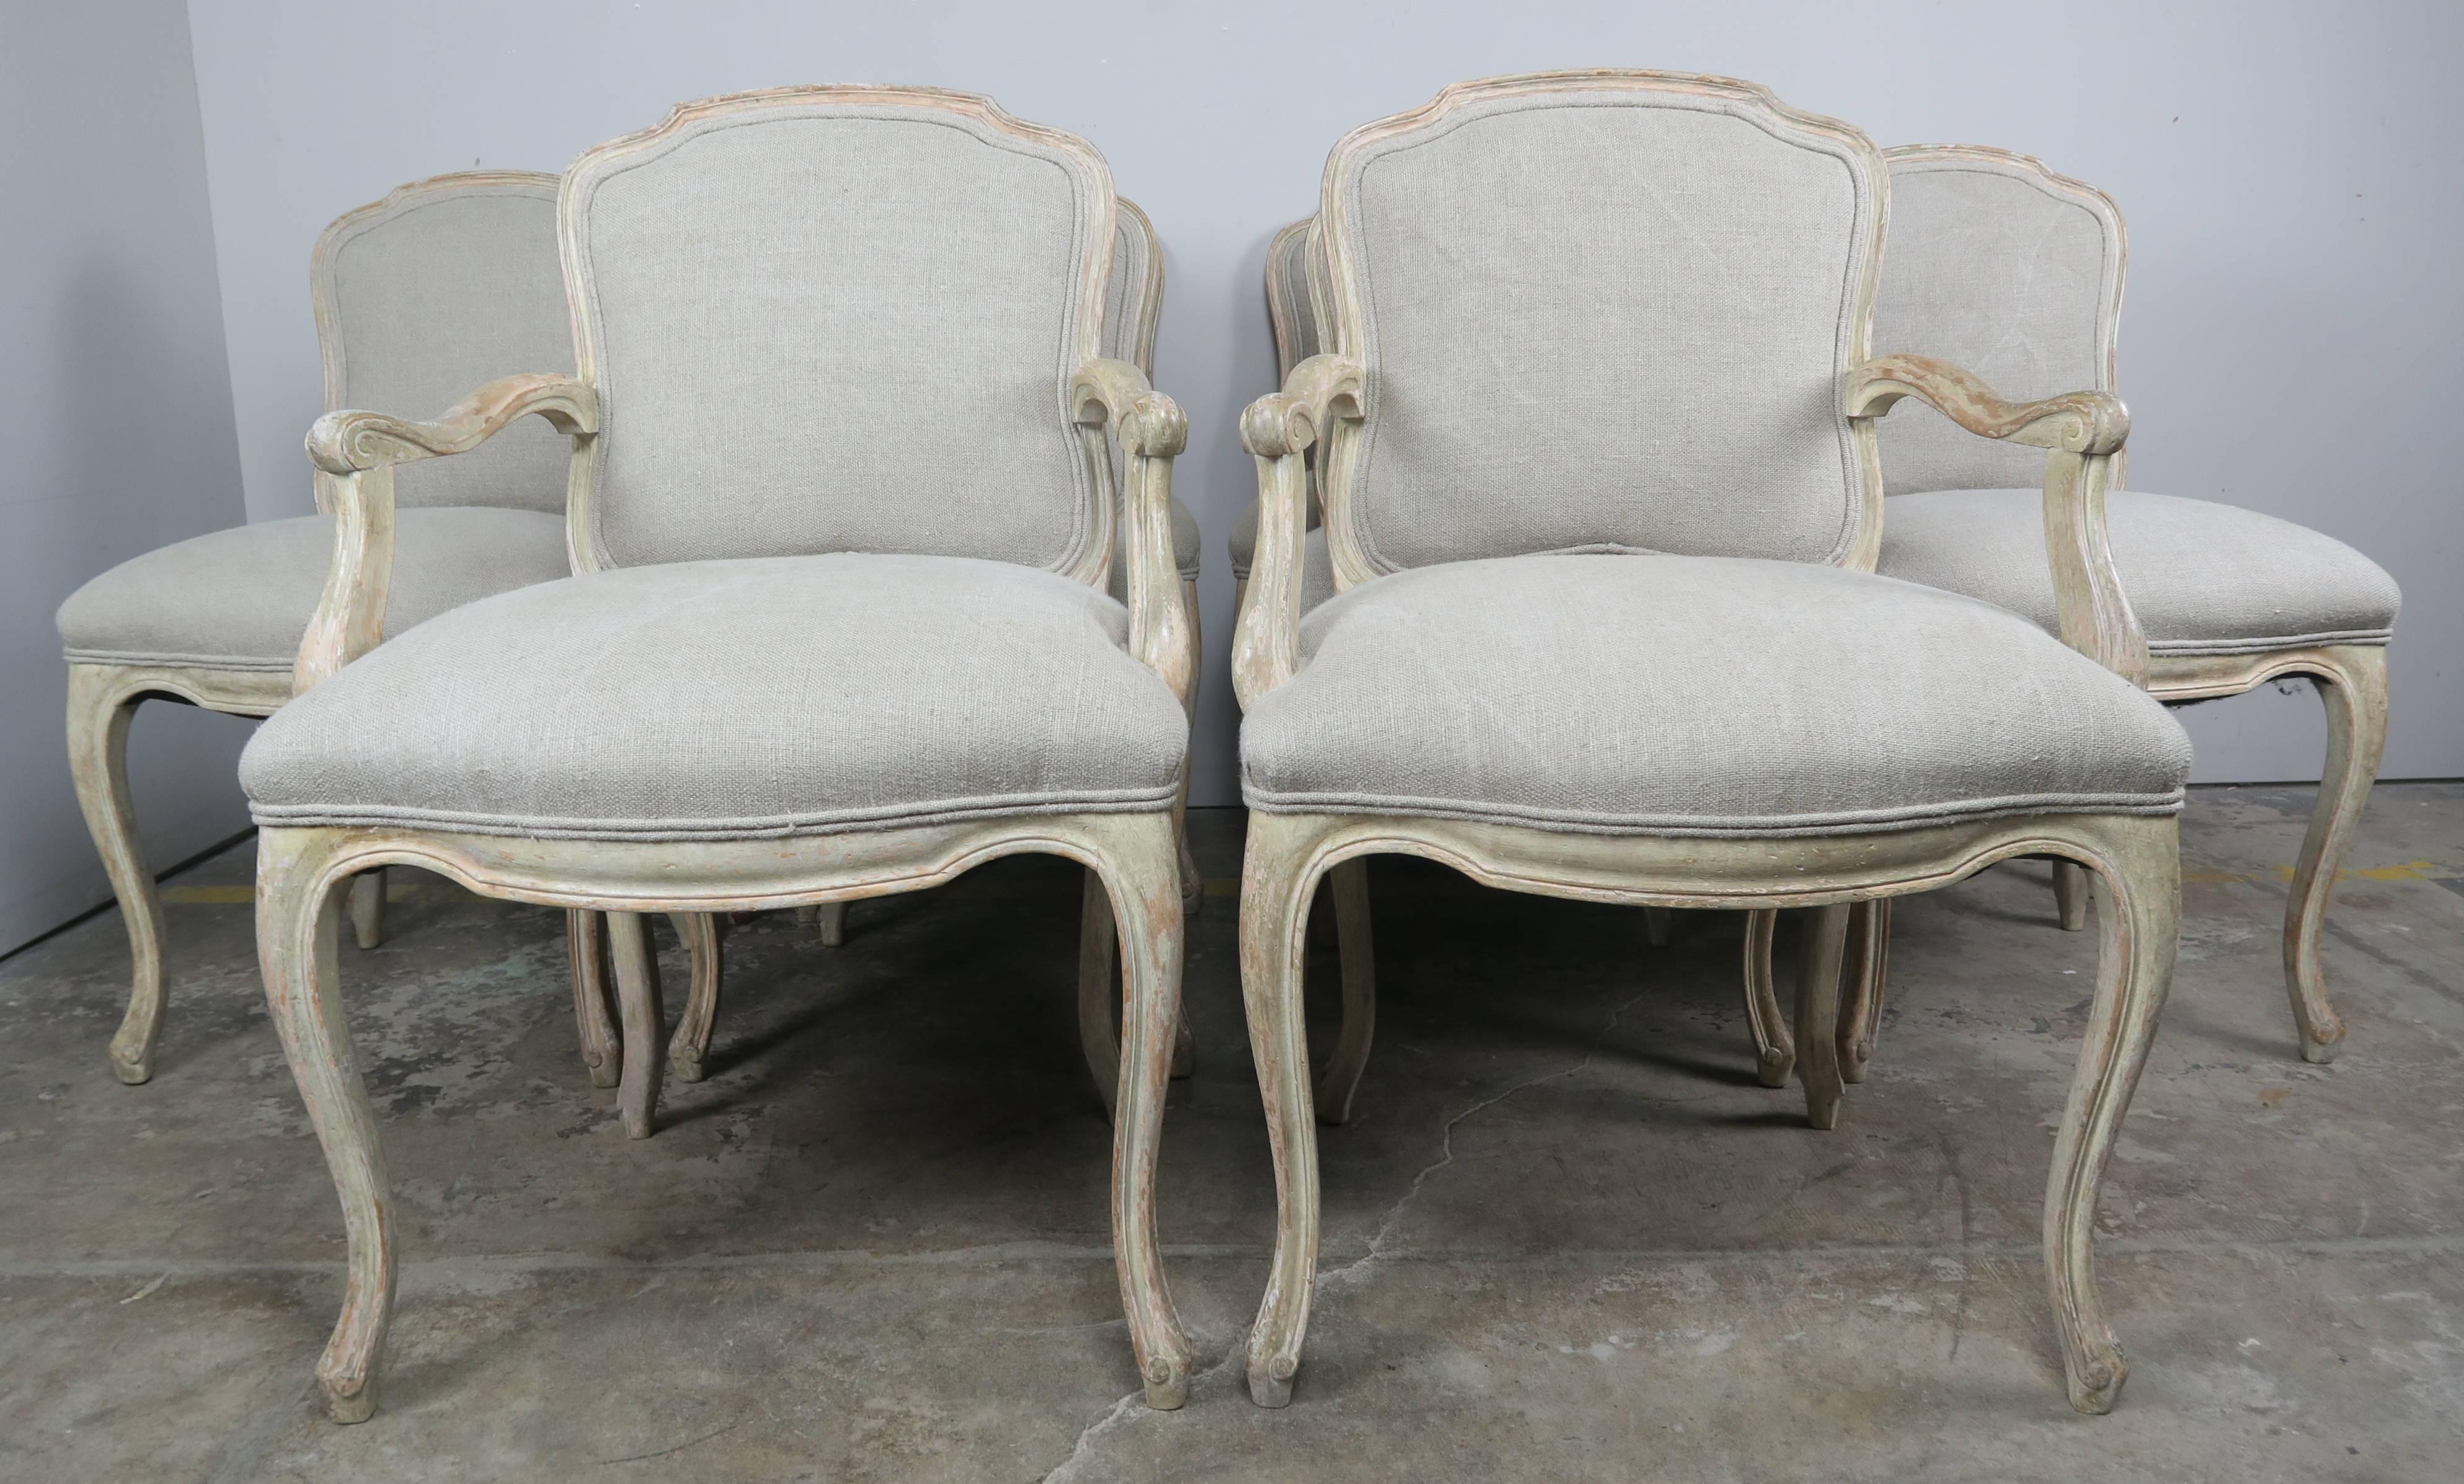 Set of ten French Louis XV style dining chairs with a beautiful worn painted finish. The vintage set of chairs have been newly upholstered in an oatmeal colored Belgium linen with self cord detail.

Measures: Armchair size: 25